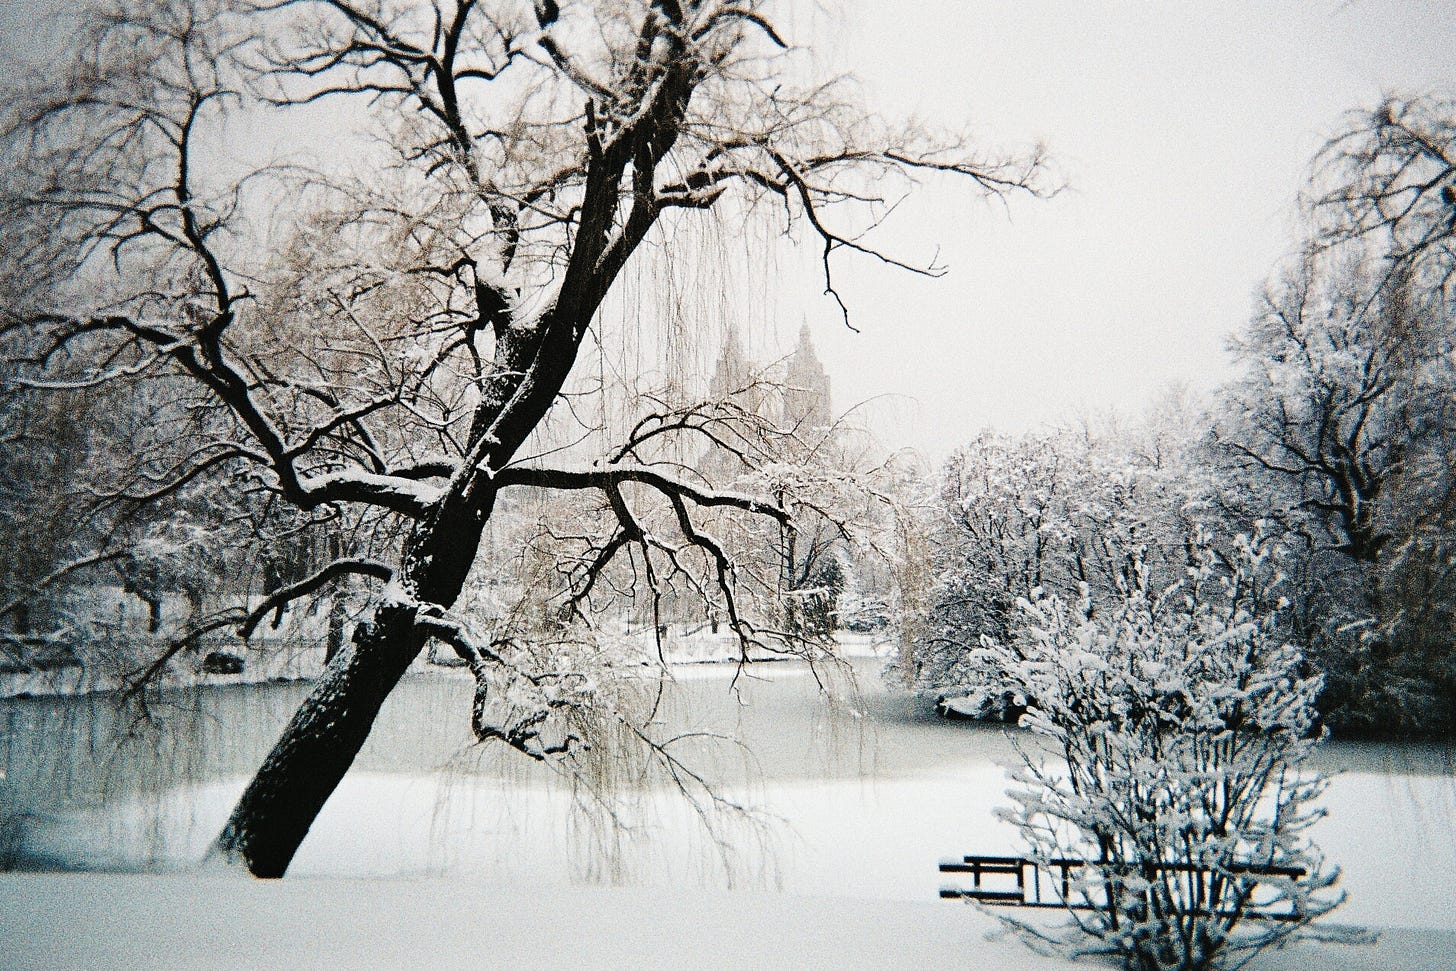 File:Central Park under snow, NYC, February 2010.jpg - Wikimedia Commons